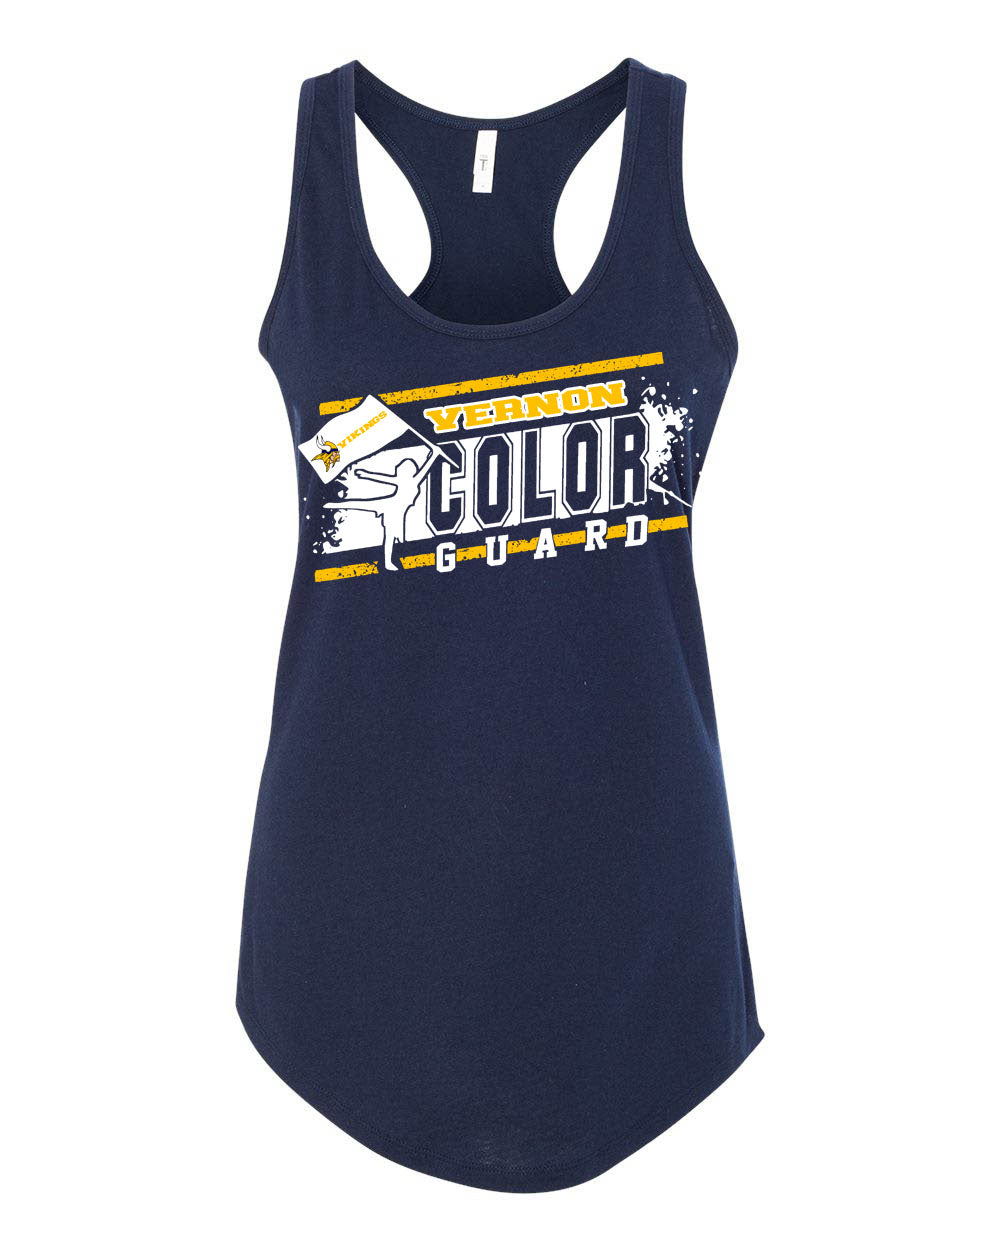 Vernon Marching Band Design 4 Tank Top